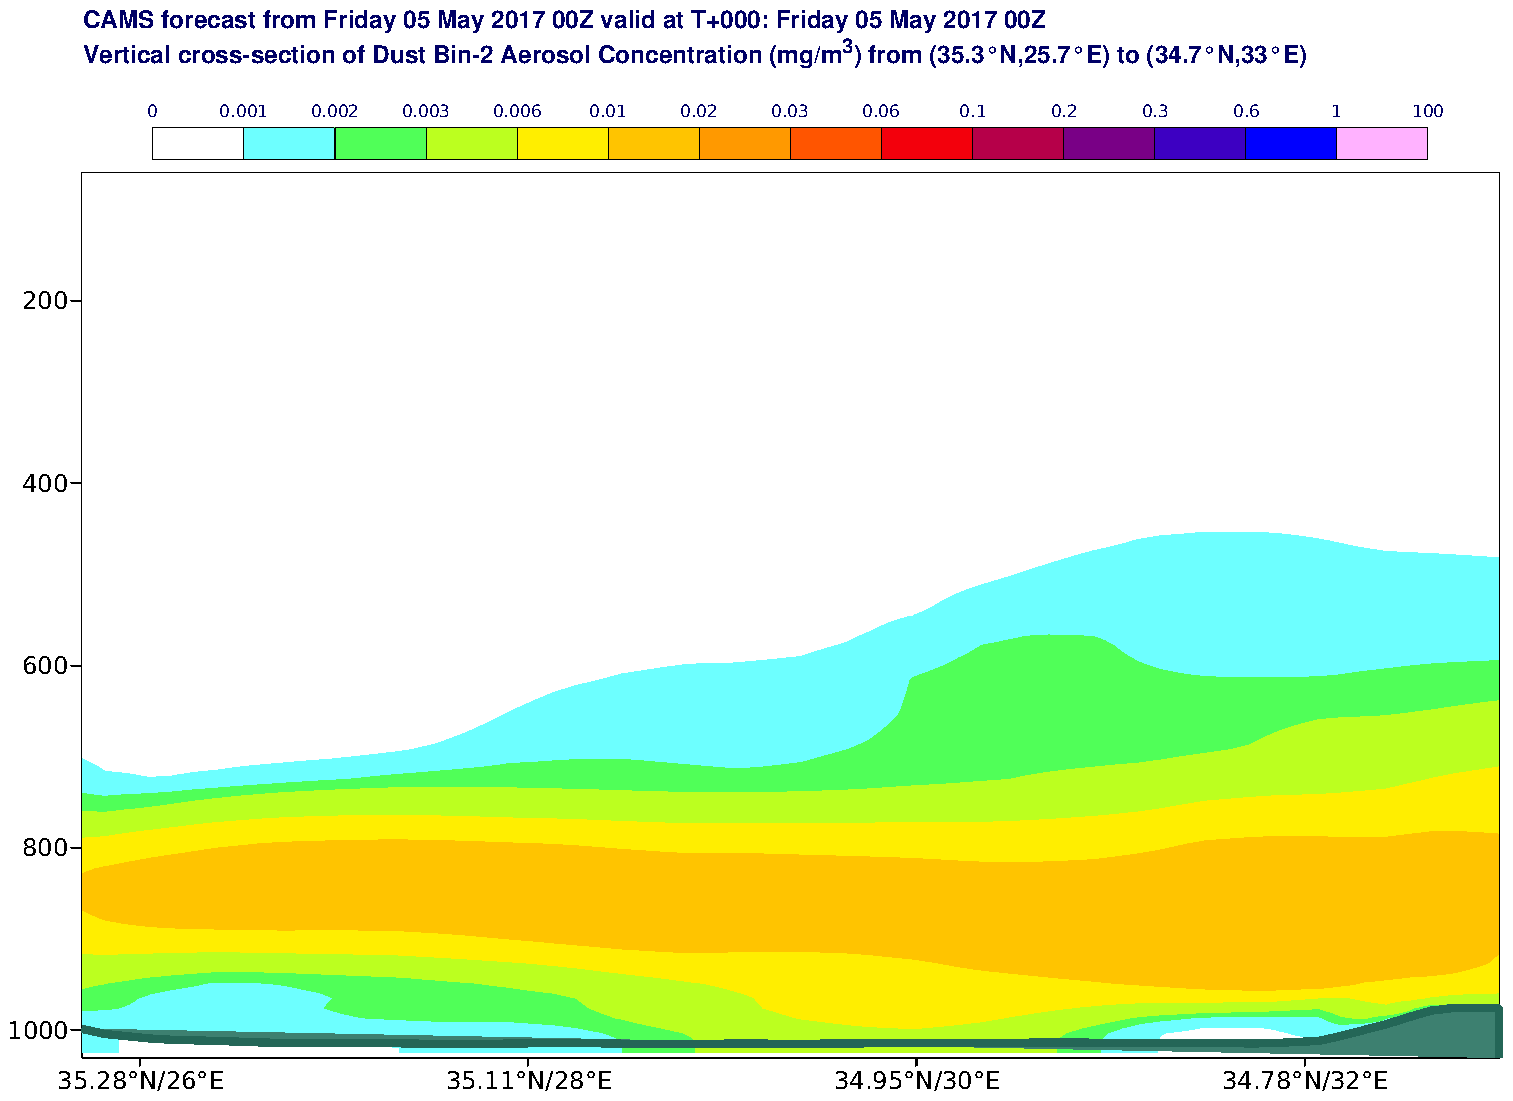 Vertical cross-section of Dust Bin-2 Aerosol Concentration (mg/m3) valid at T0 - 2017-05-05 00:00